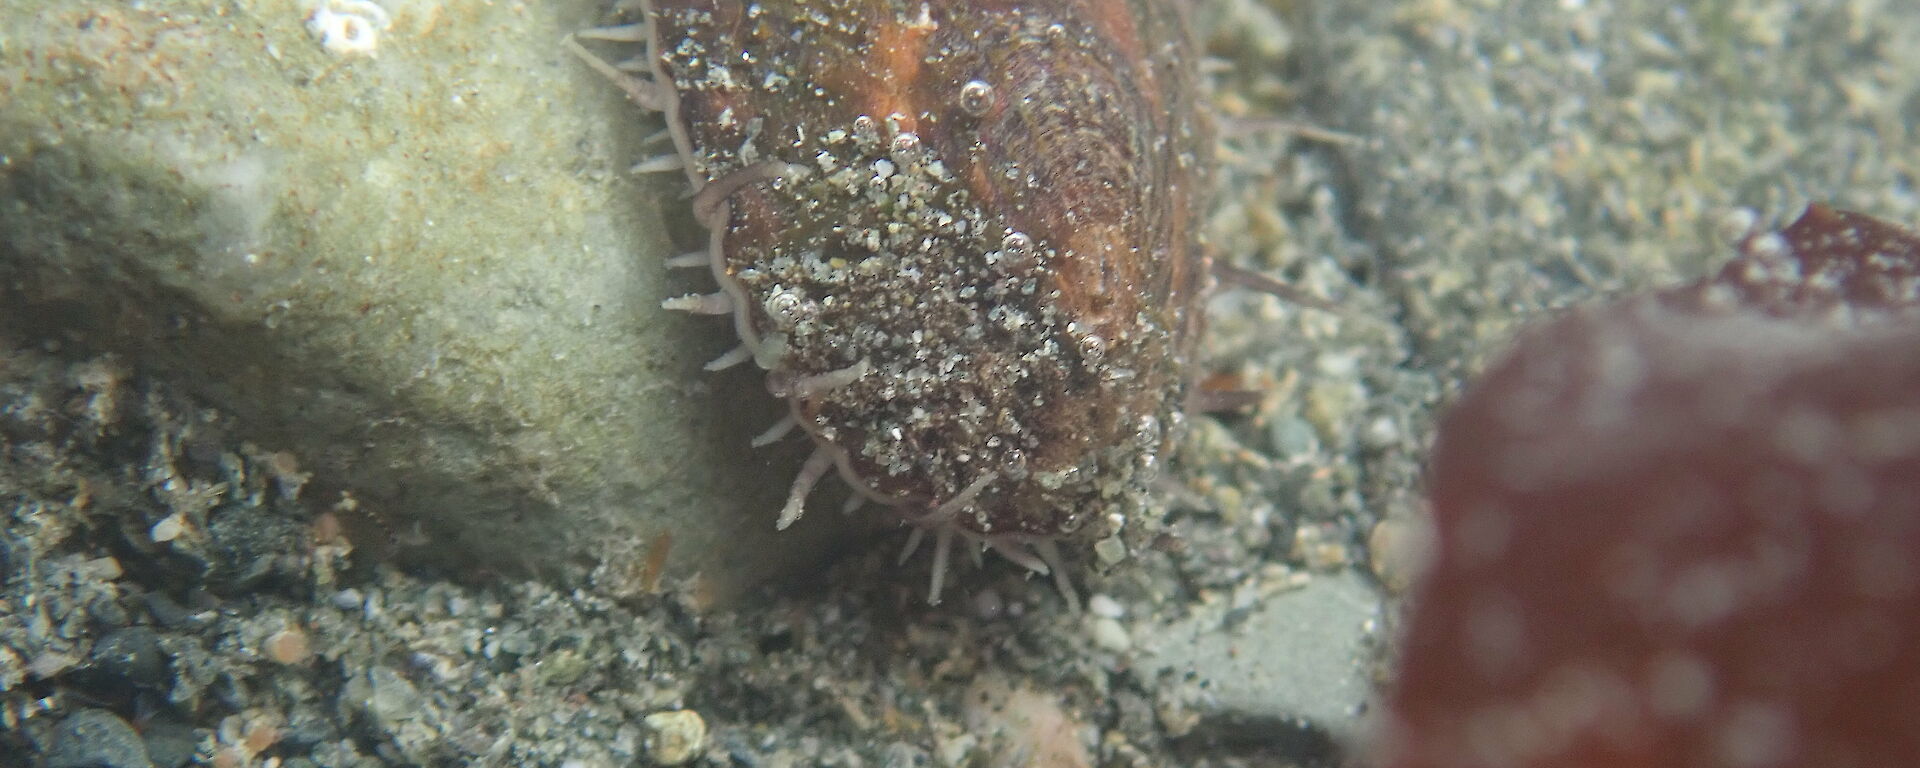 A limpet moving around in a rock pool at Macca recently